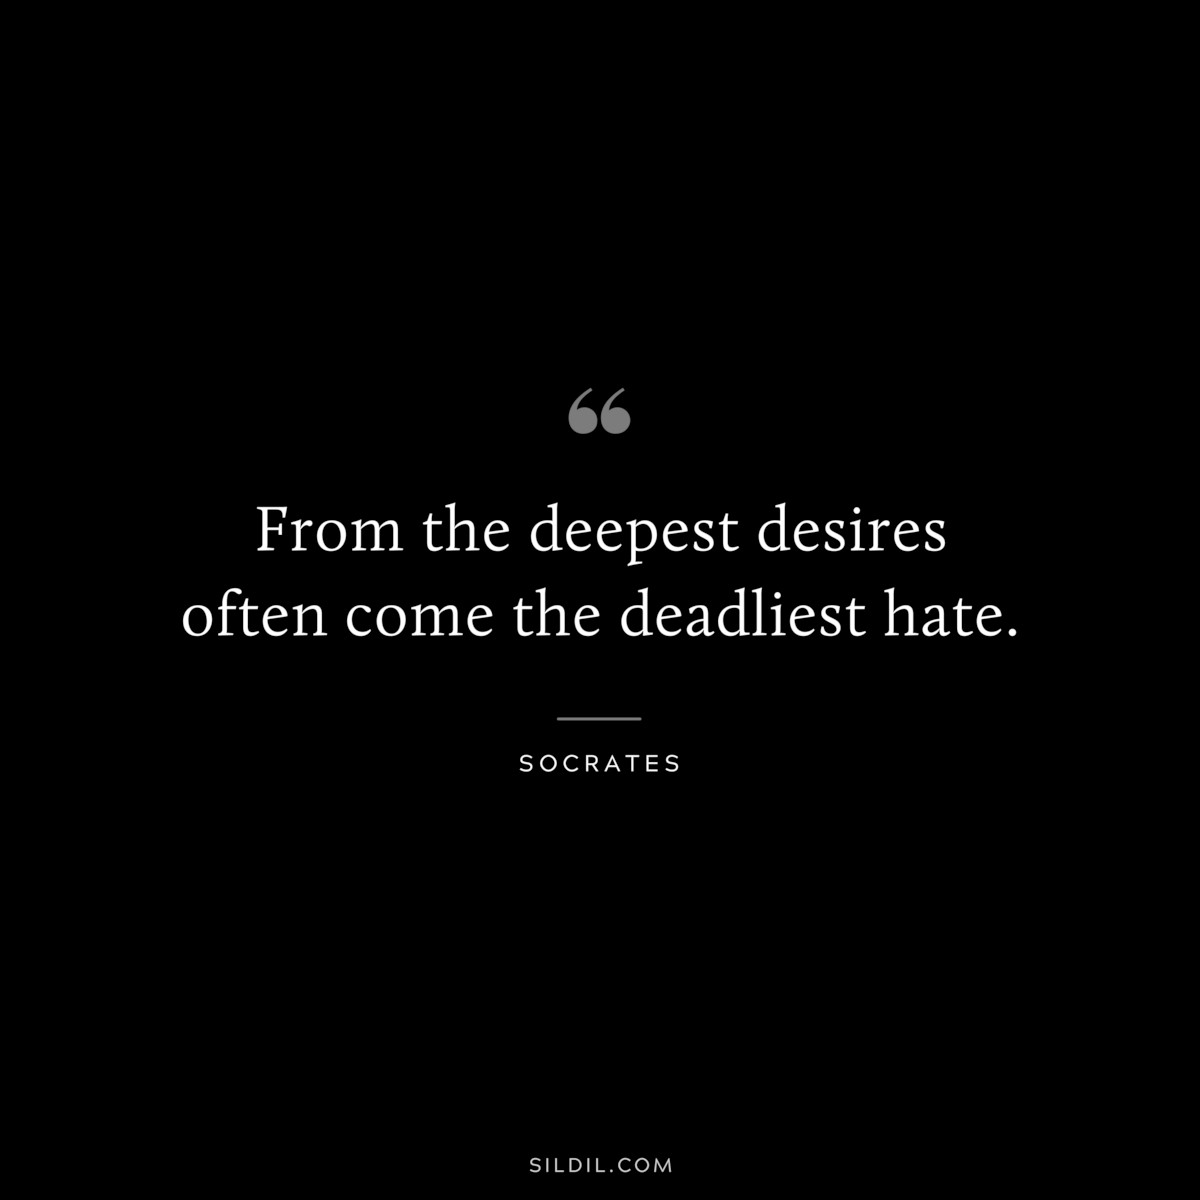 From the deepest desires often come the deadliest hate. ― Socrates